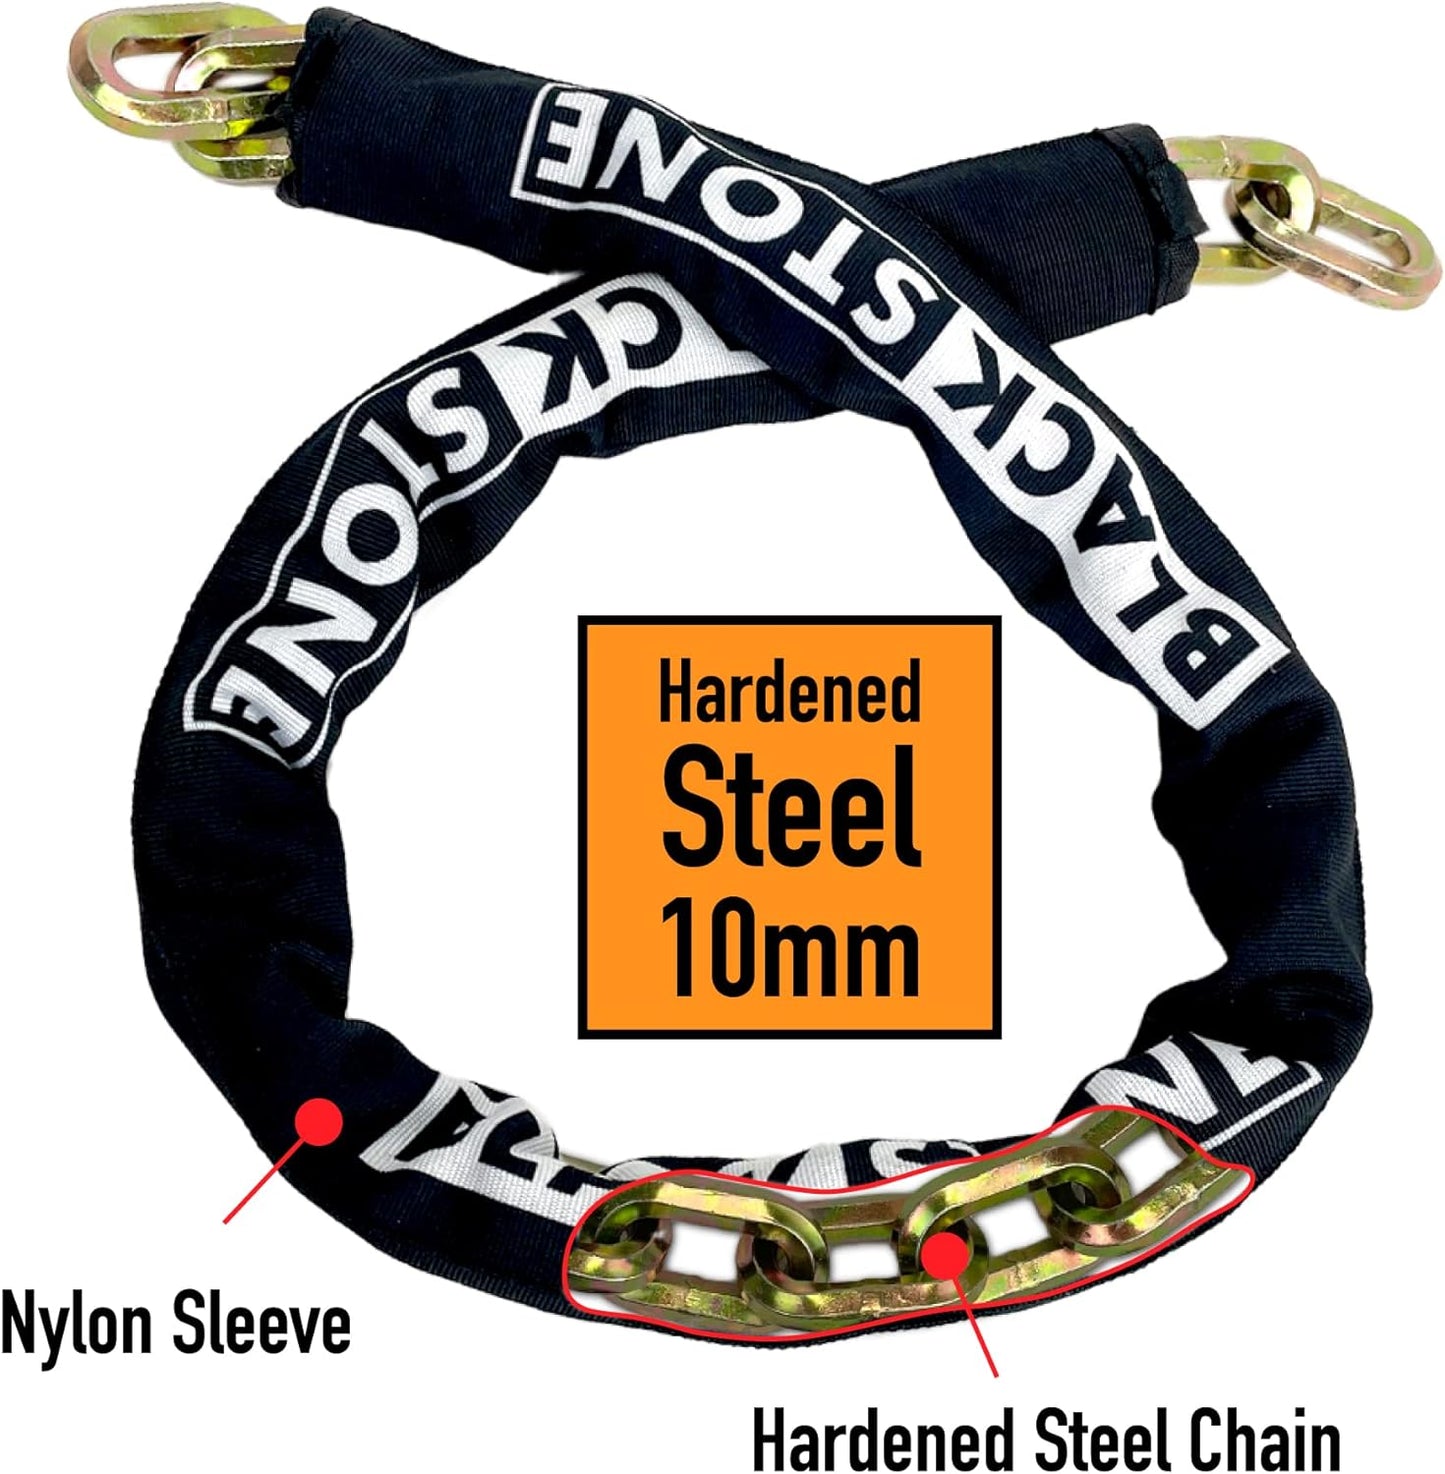 A security chain from Black Stone featuring a 10mm hardened steel chain with a protective black nylon sleeve, detailed with the brand name in contrasting white font. Ideal for securing bikes or property, providing strong theft resistance